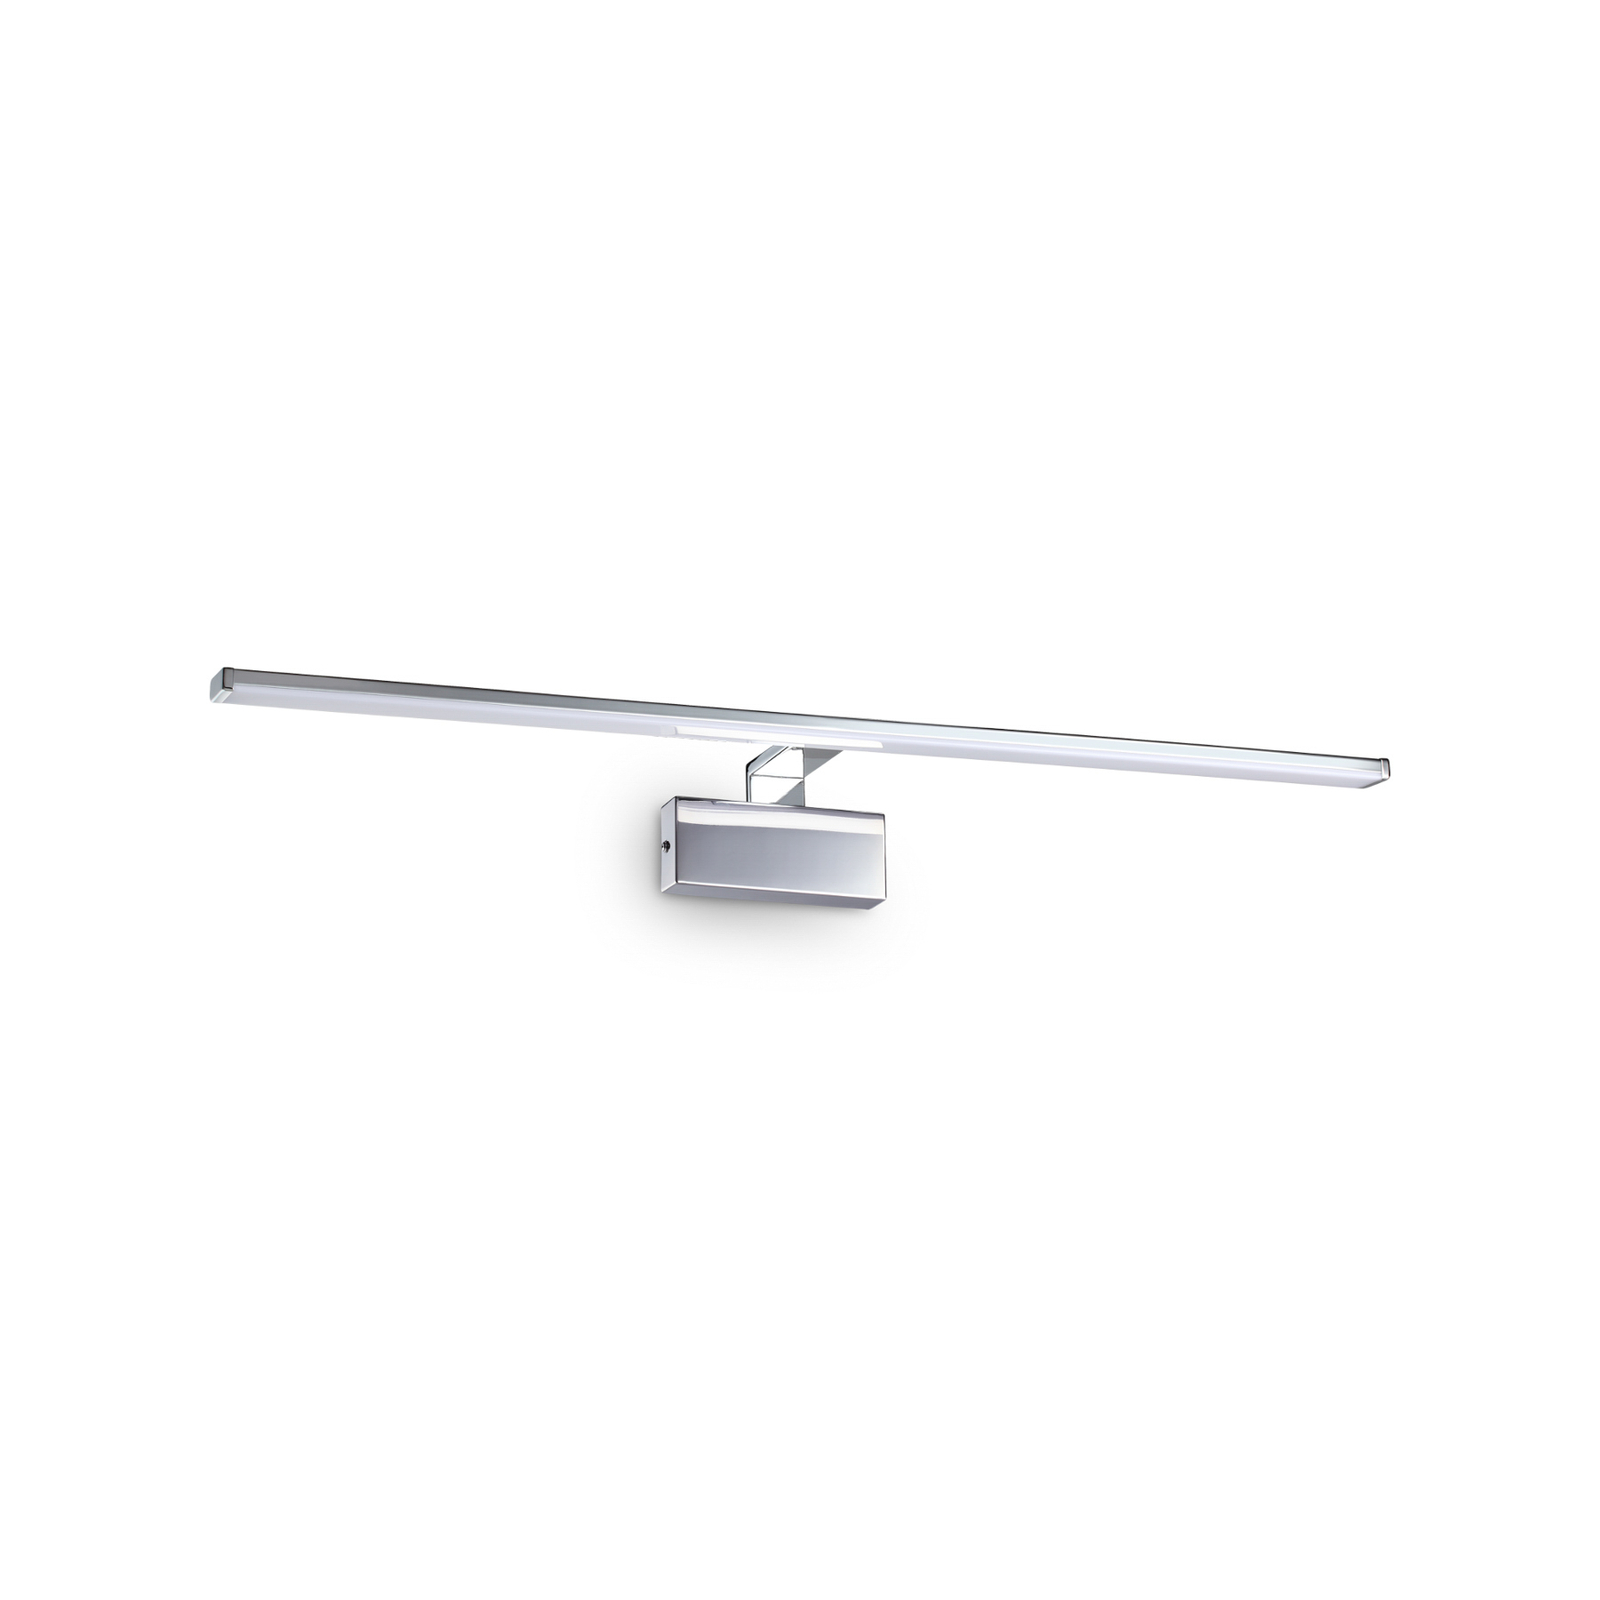 Ideal Lux LED wall lamp Alma chrome-coloured metal width 81 cm